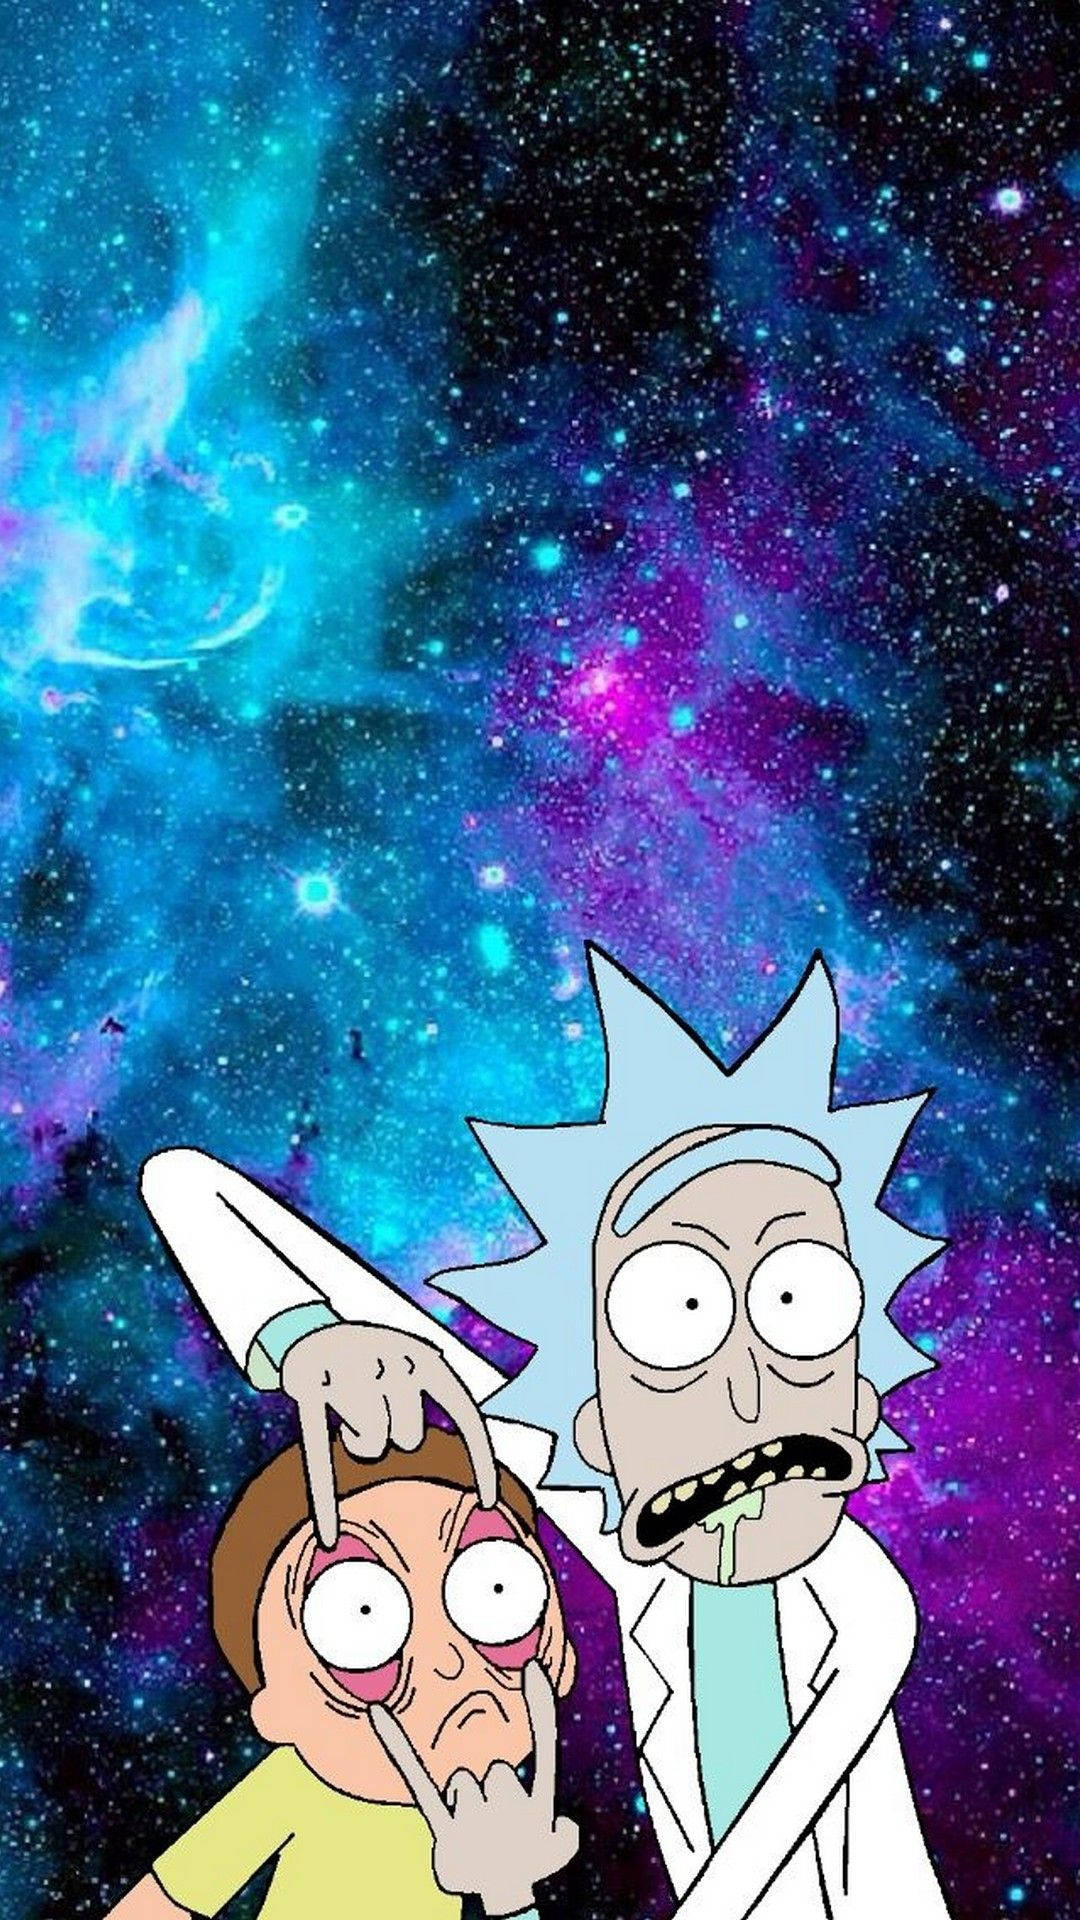 Free Rick And Morty Iphone Wallpaper Downloads, [200+] Rick And Morty  Iphone Wallpapers for FREE 